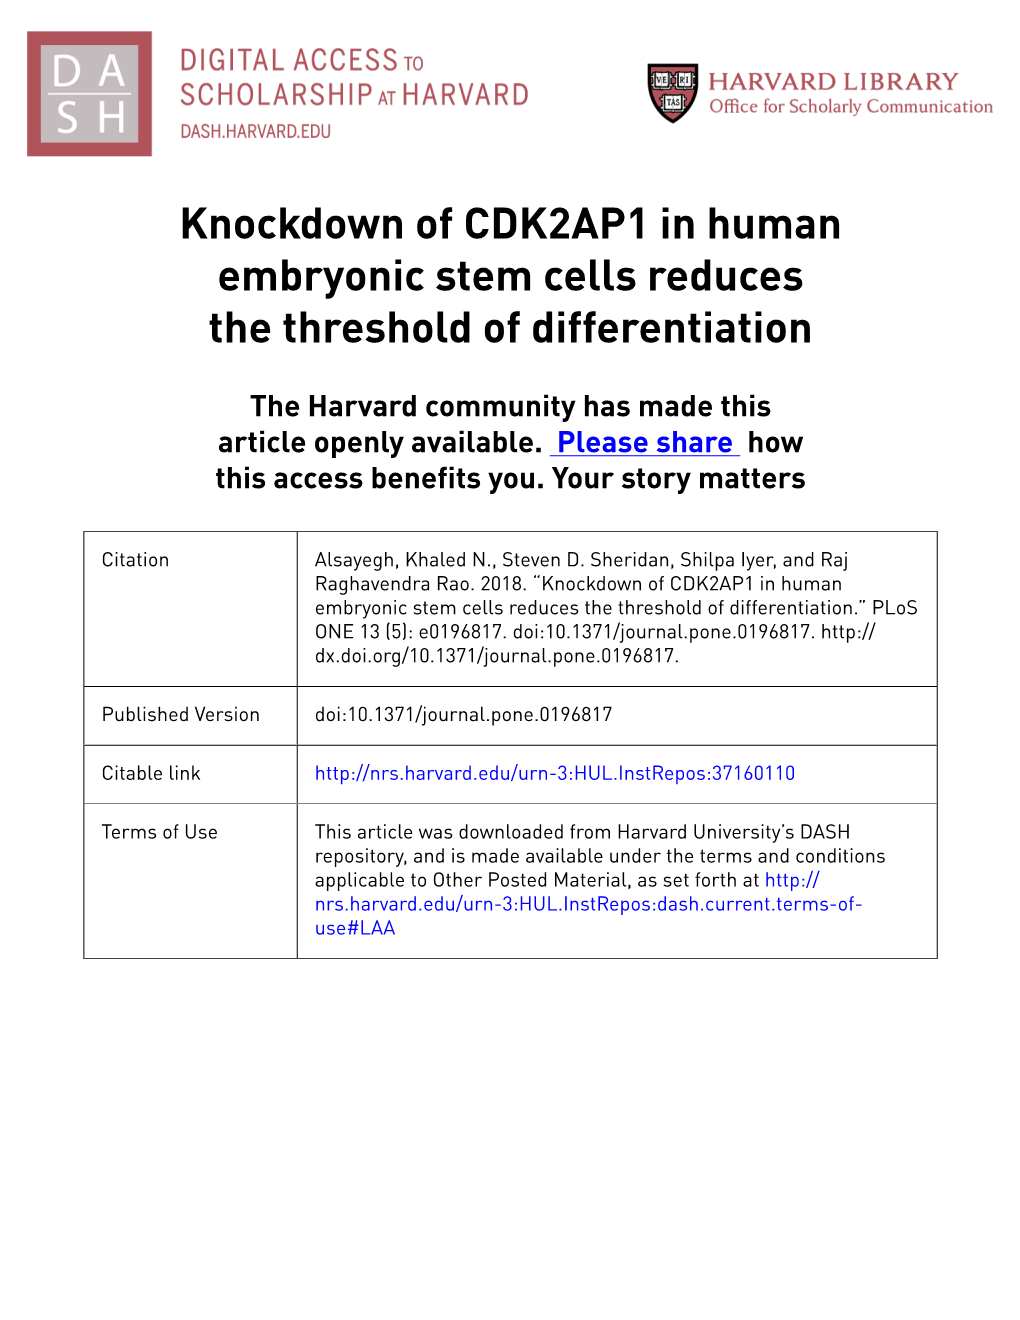 Knockdown of CDK2AP1 in Human Embryonic Stem Cells Reduces the Threshold of Differentiation